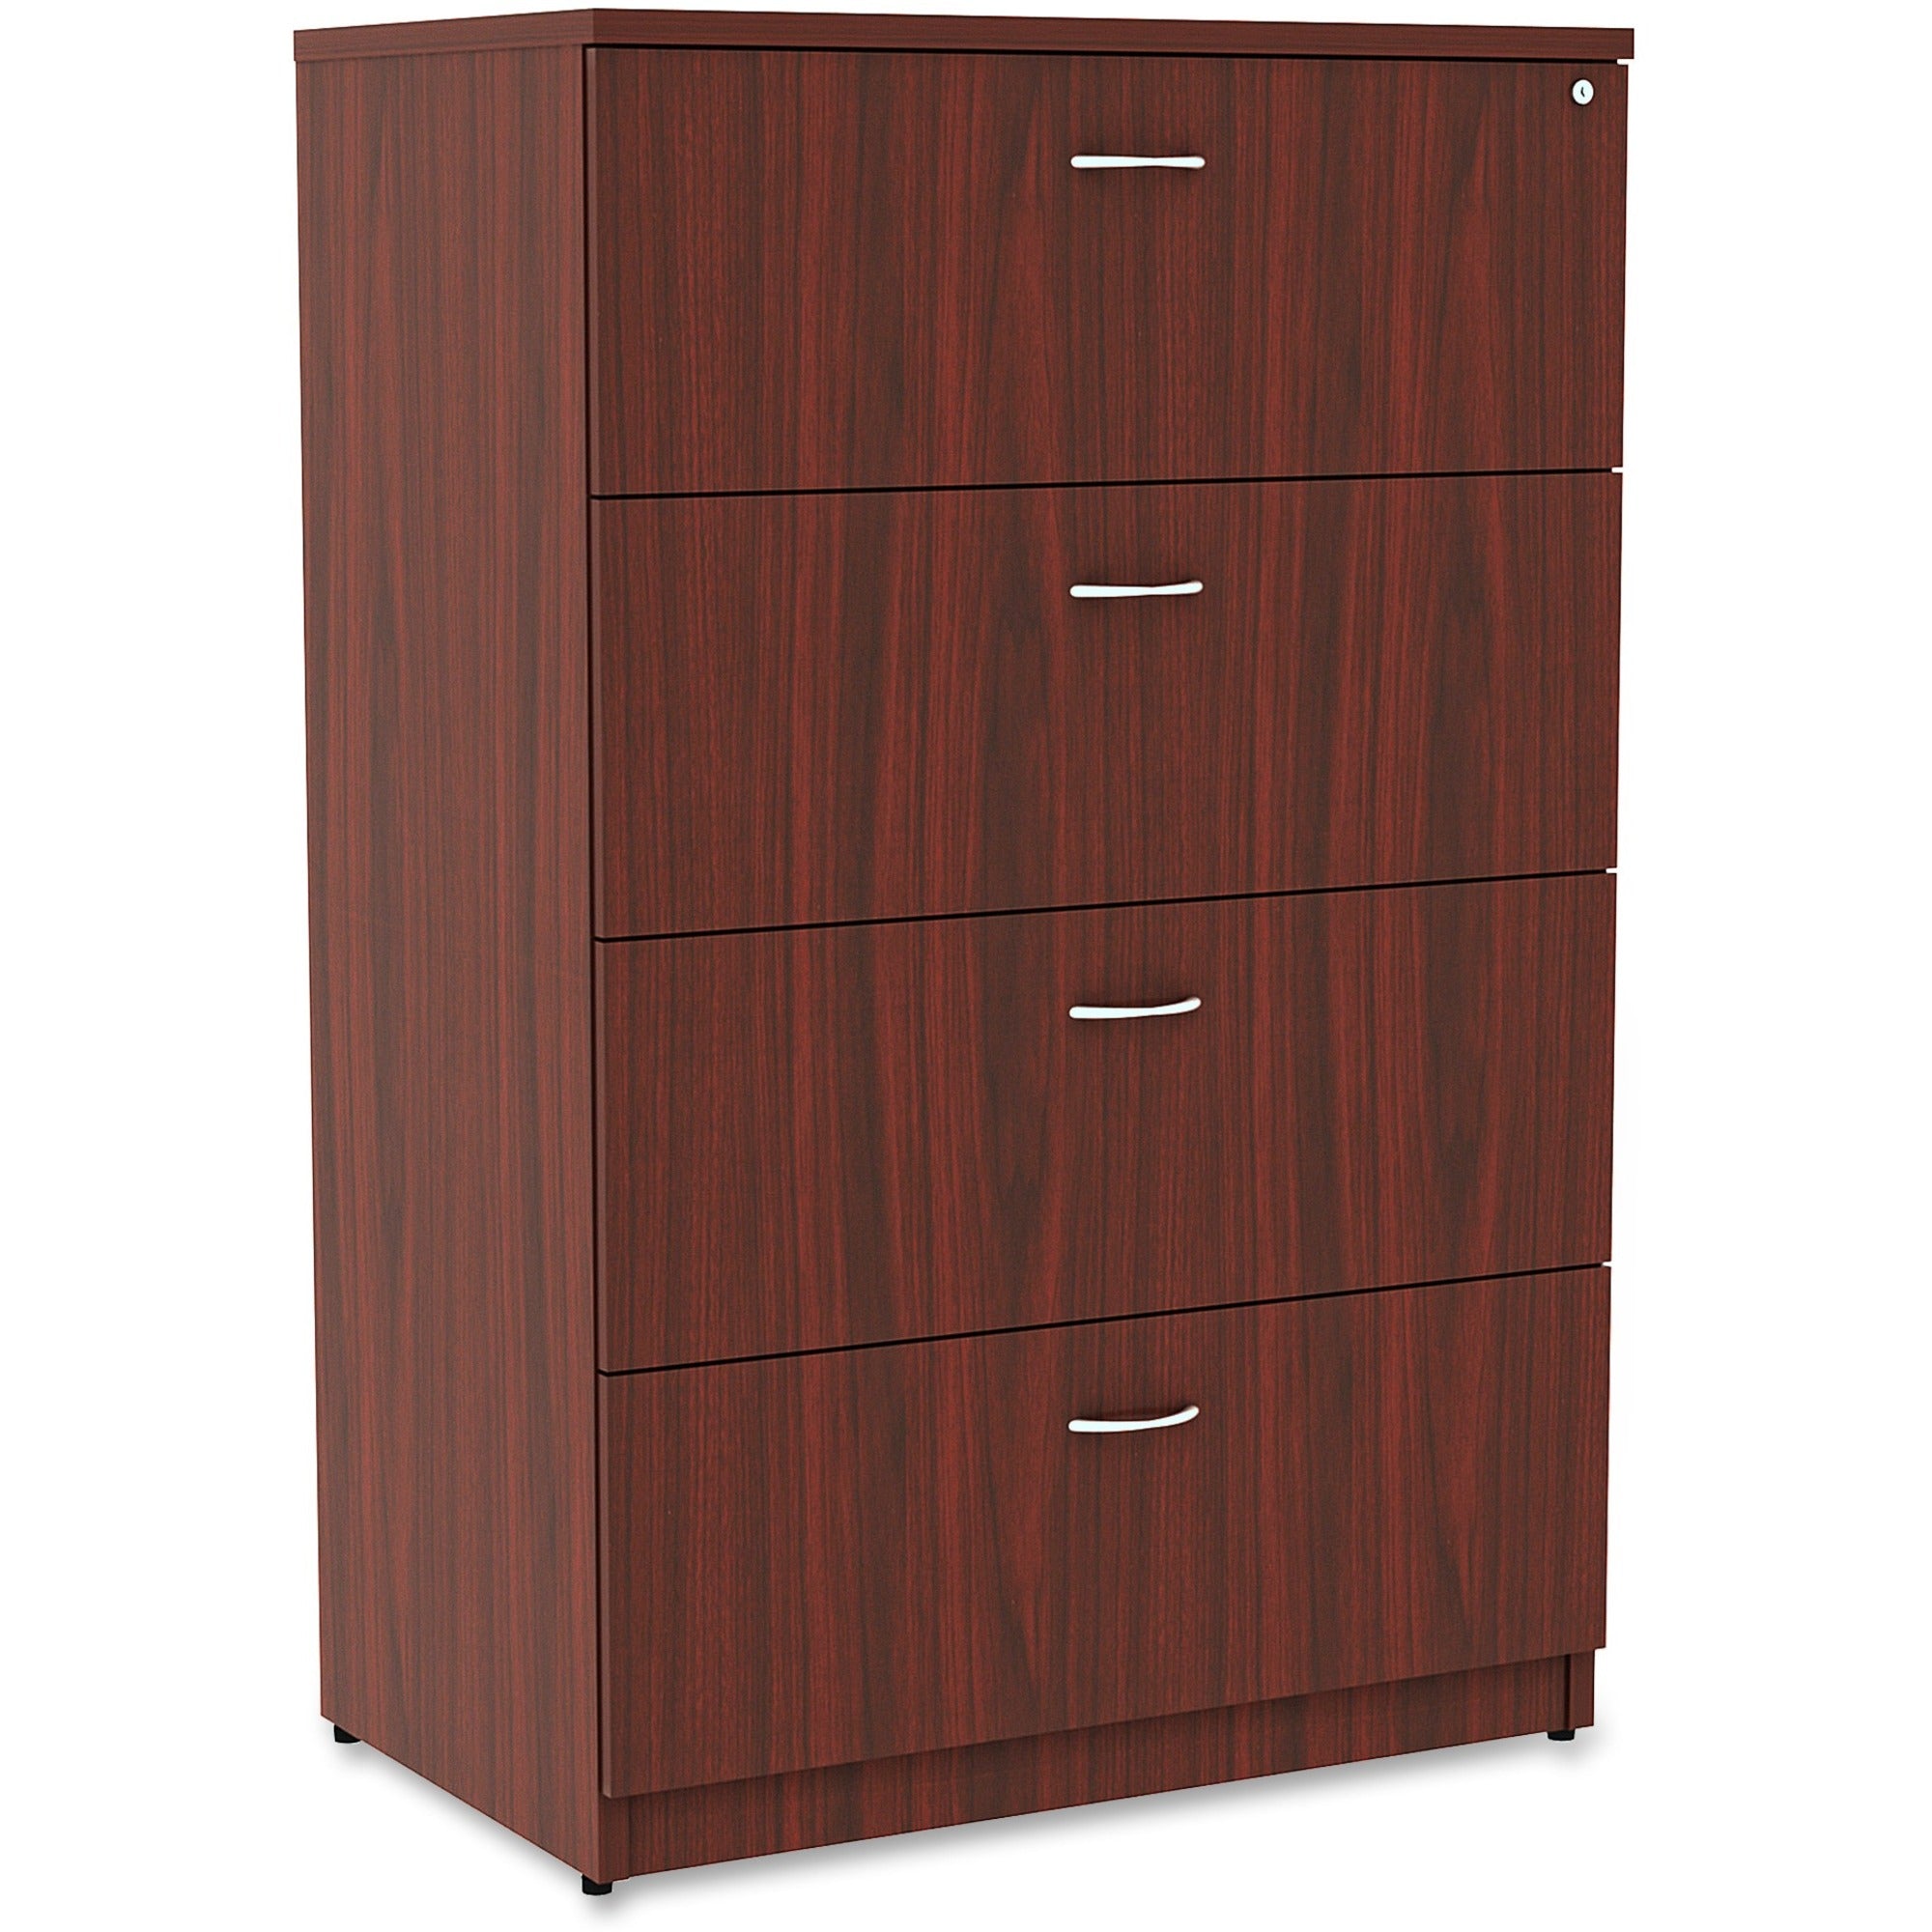 lorell-essentials-series-4-drawer-lateral-file-1-top-355-x-22548-4-x-file-drawers-finish-mahogany-laminate_llr34386 - 1